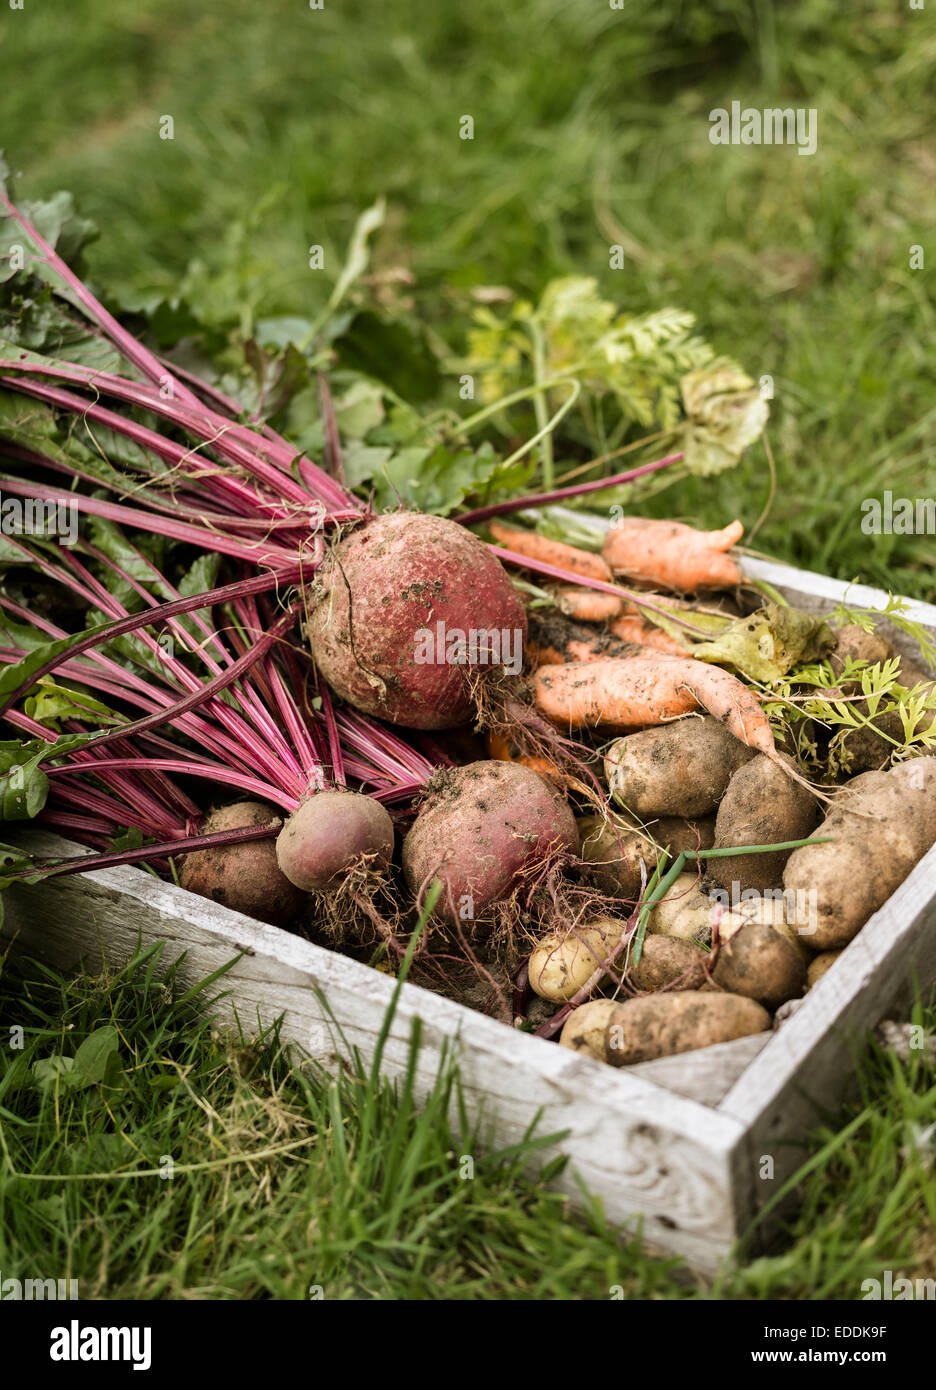 Wooden box full of freshly picked vegetables, including carrots, beetroots and potatoes. Stock Photo